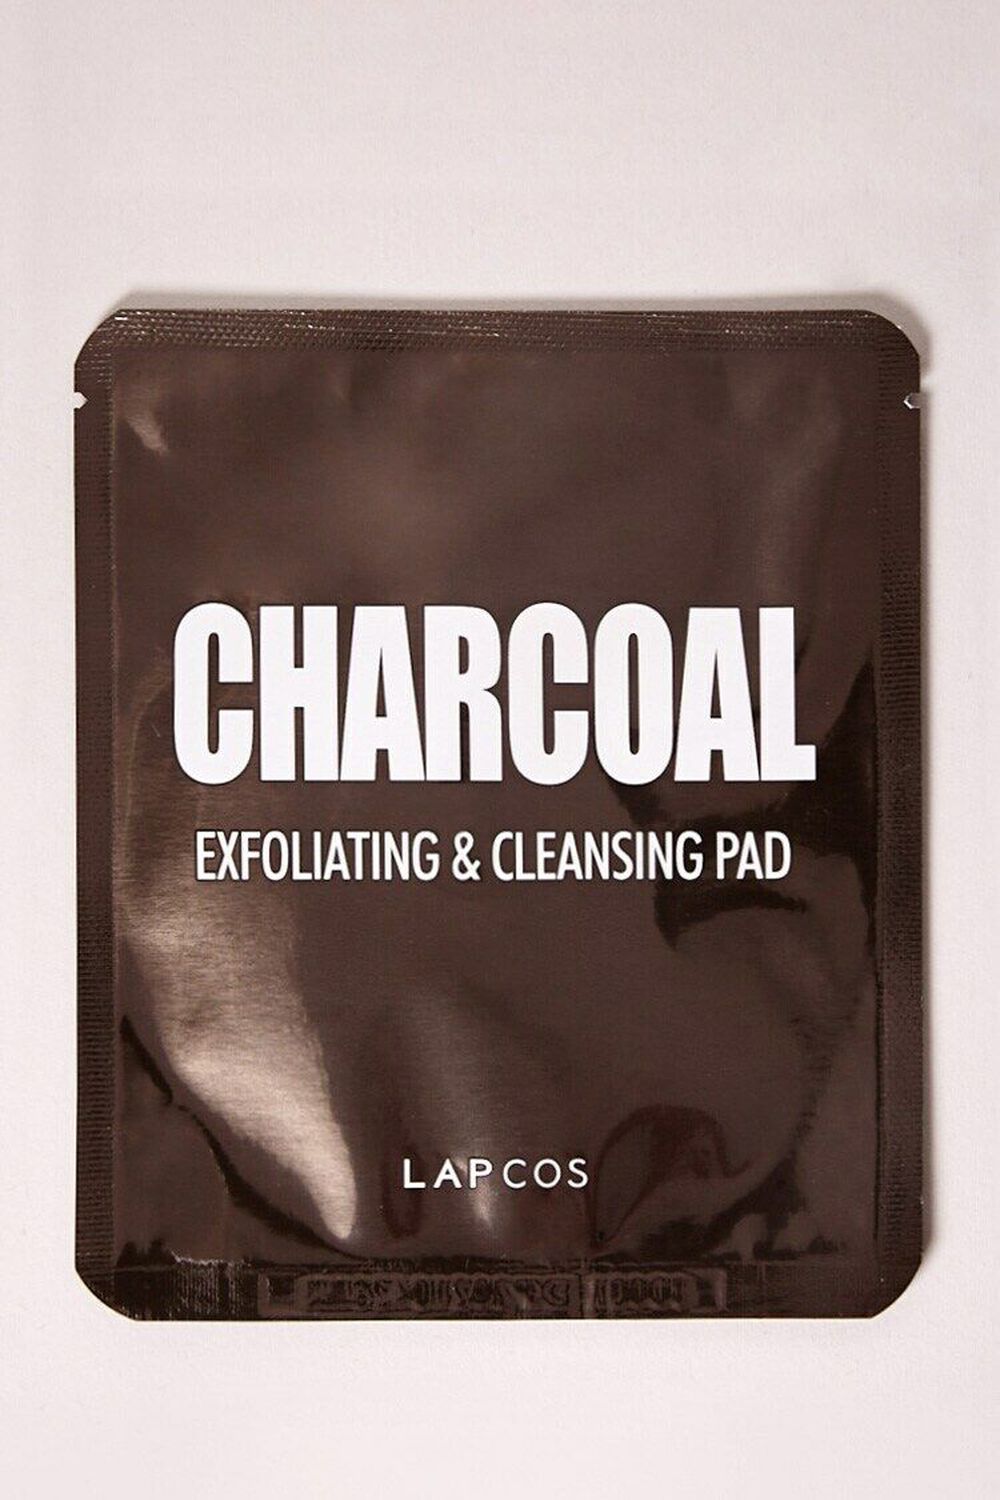 BLACK LAPCOS Charcoal Exfoliating & Cleansing Pad, image 1